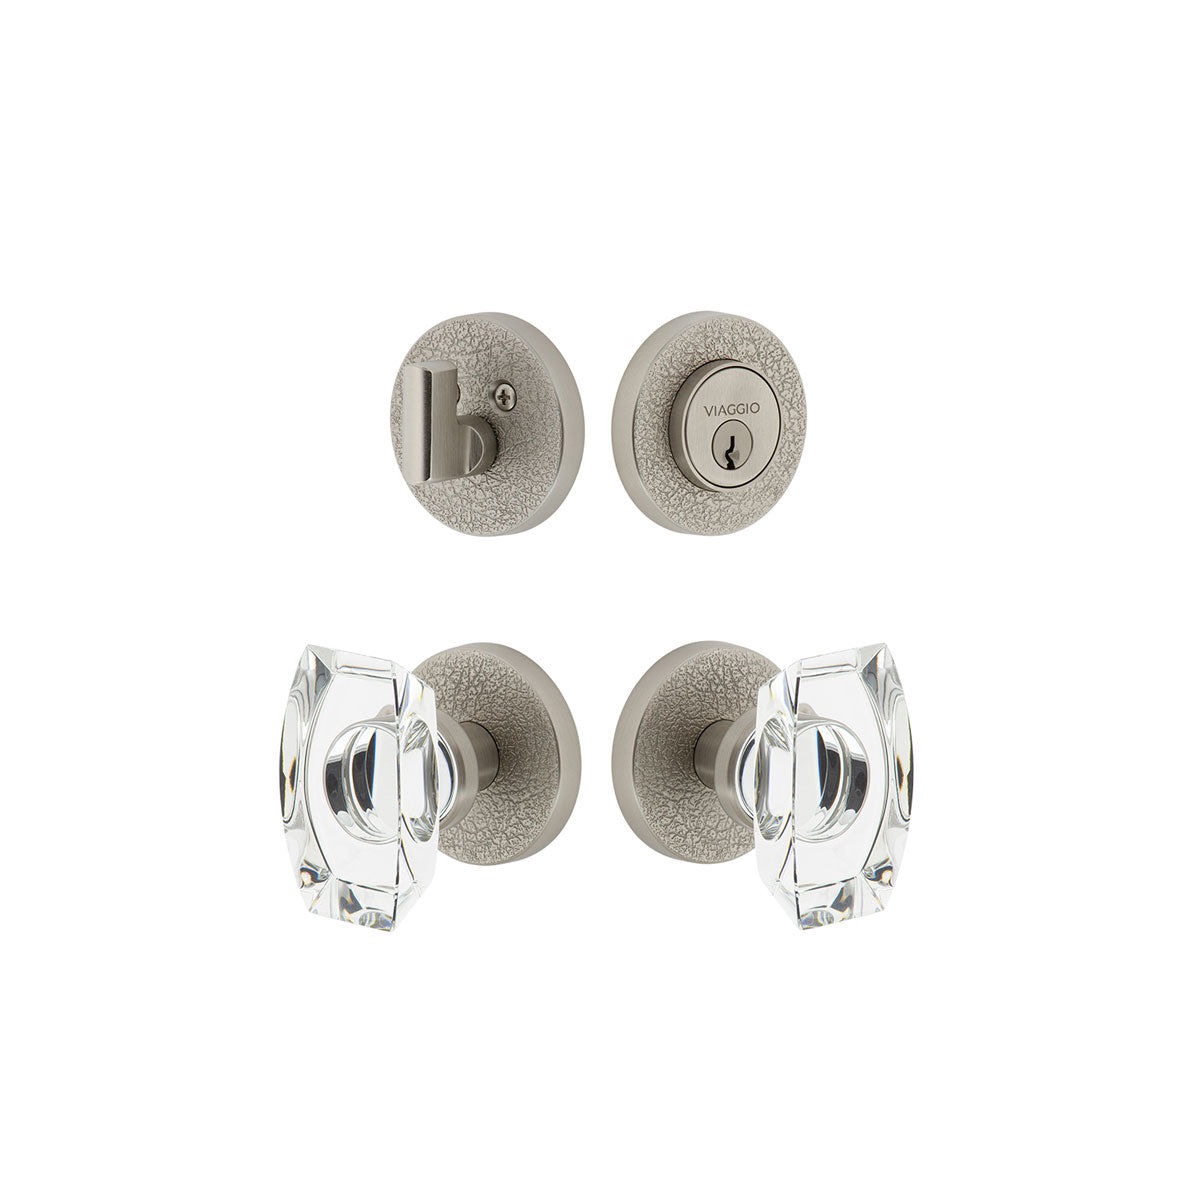 Circolo Leather Rosette Entry Set with Stella Knob in Satin Nickel